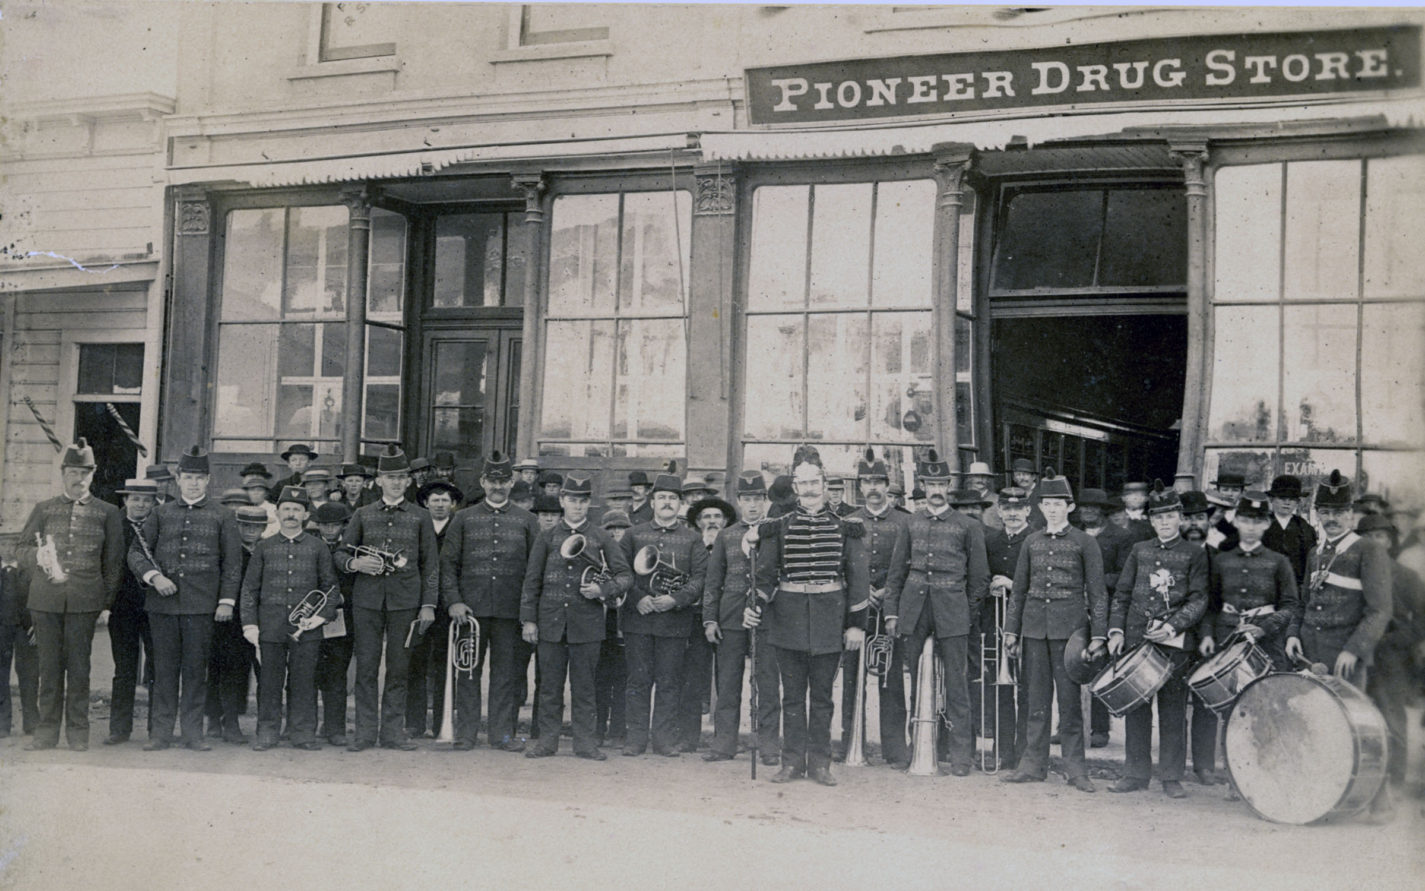 Marching band in front of the Pioneer Drug Store in Redwood City circa 1880s